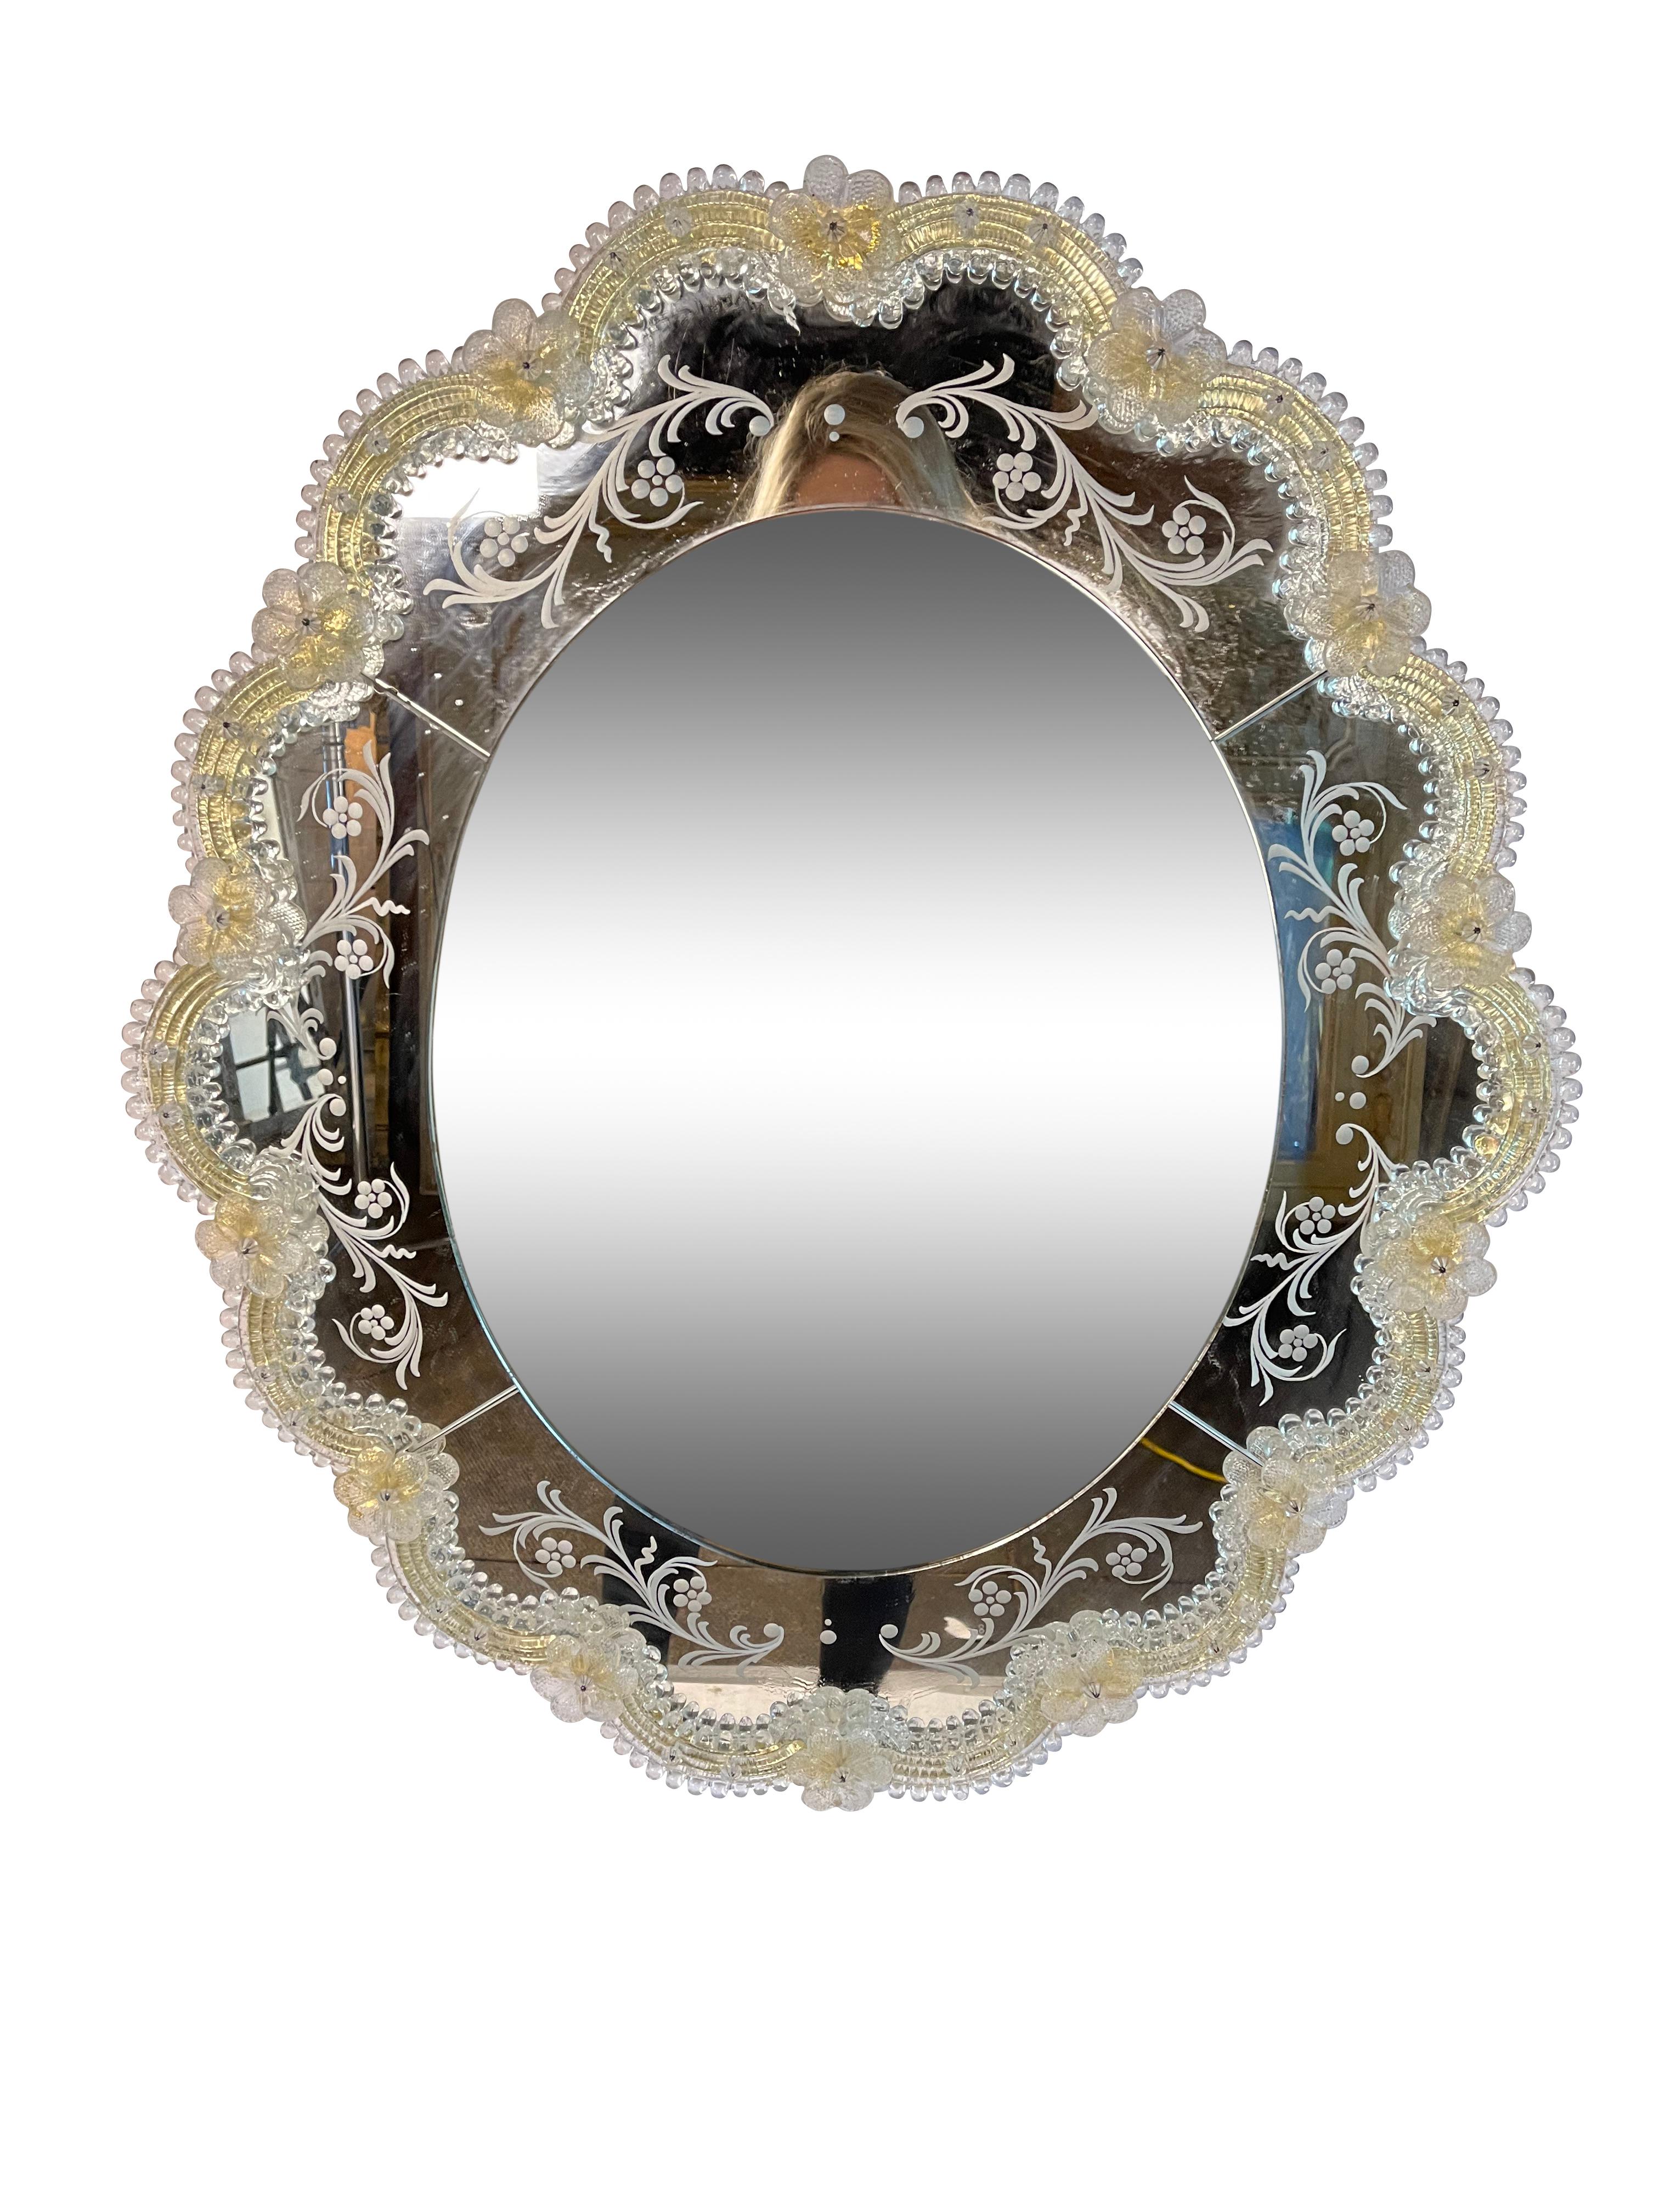 Etched Pair of Murano Glass Oval Mirrors with Gold Glass Accents